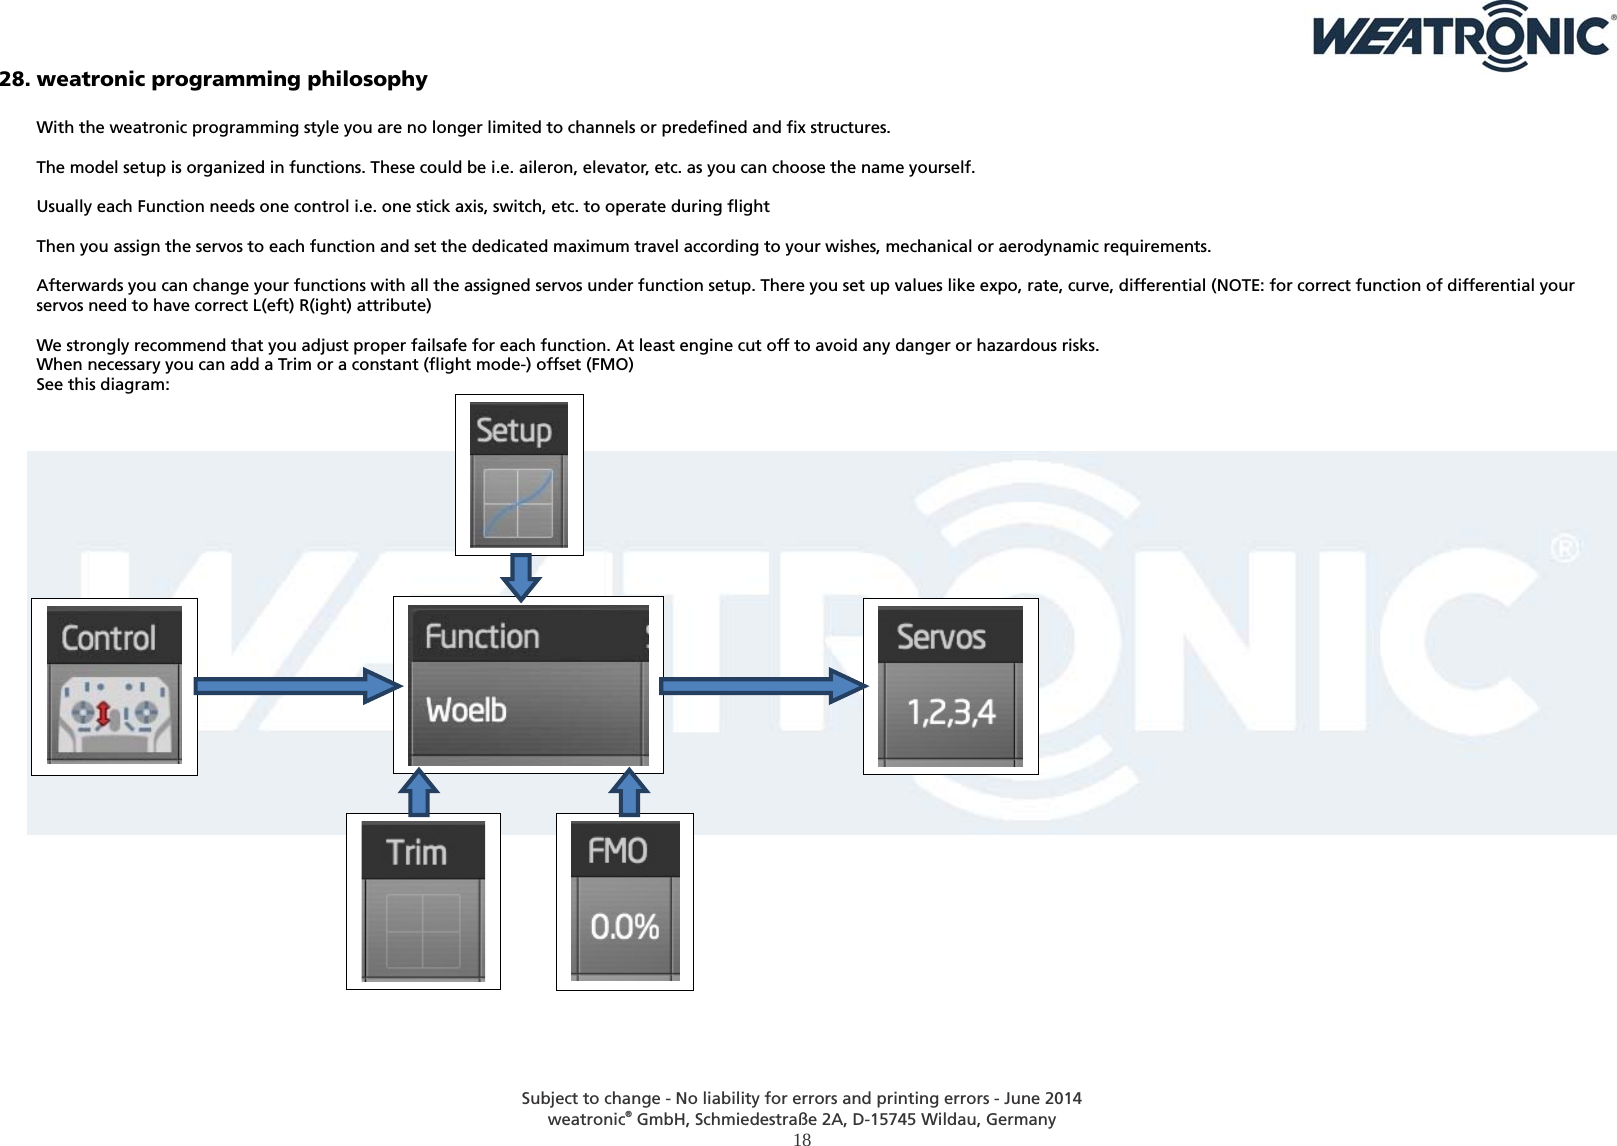  Subject to change - No liability for errors and printing errors - June 2014 weatronic® GmbH, Schmiedestraße 2A, D-15745 Wildau, Germany  18  28. weatronic programming philosophy  With the weatronic programming style you are no longer limited to channels or predefined and fix structures.  The model setup is organized in functions. These could be i.e. aileron, elevator, etc. as you can choose the name yourself.   Usually each Function needs one control i.e. one stick axis, switch, etc. to operate during flight  Then you assign the servos to each function and set the dedicated maximum travel according to your wishes, mechanical or aerodynamic requirements.  Afterwards you can change your functions with all the assigned servos under function setup. There you set up values like expo, rate, curve, differential (NOTE: for correct function of differential your servos need to have correct L(eft) R(ight) attribute)  We strongly recommend that you adjust proper failsafe for each function. At least engine cut off to avoid any danger or hazardous risks. When necessary you can add a Trim or a constant (flight mode-) offset (FMO)  See this diagram:                